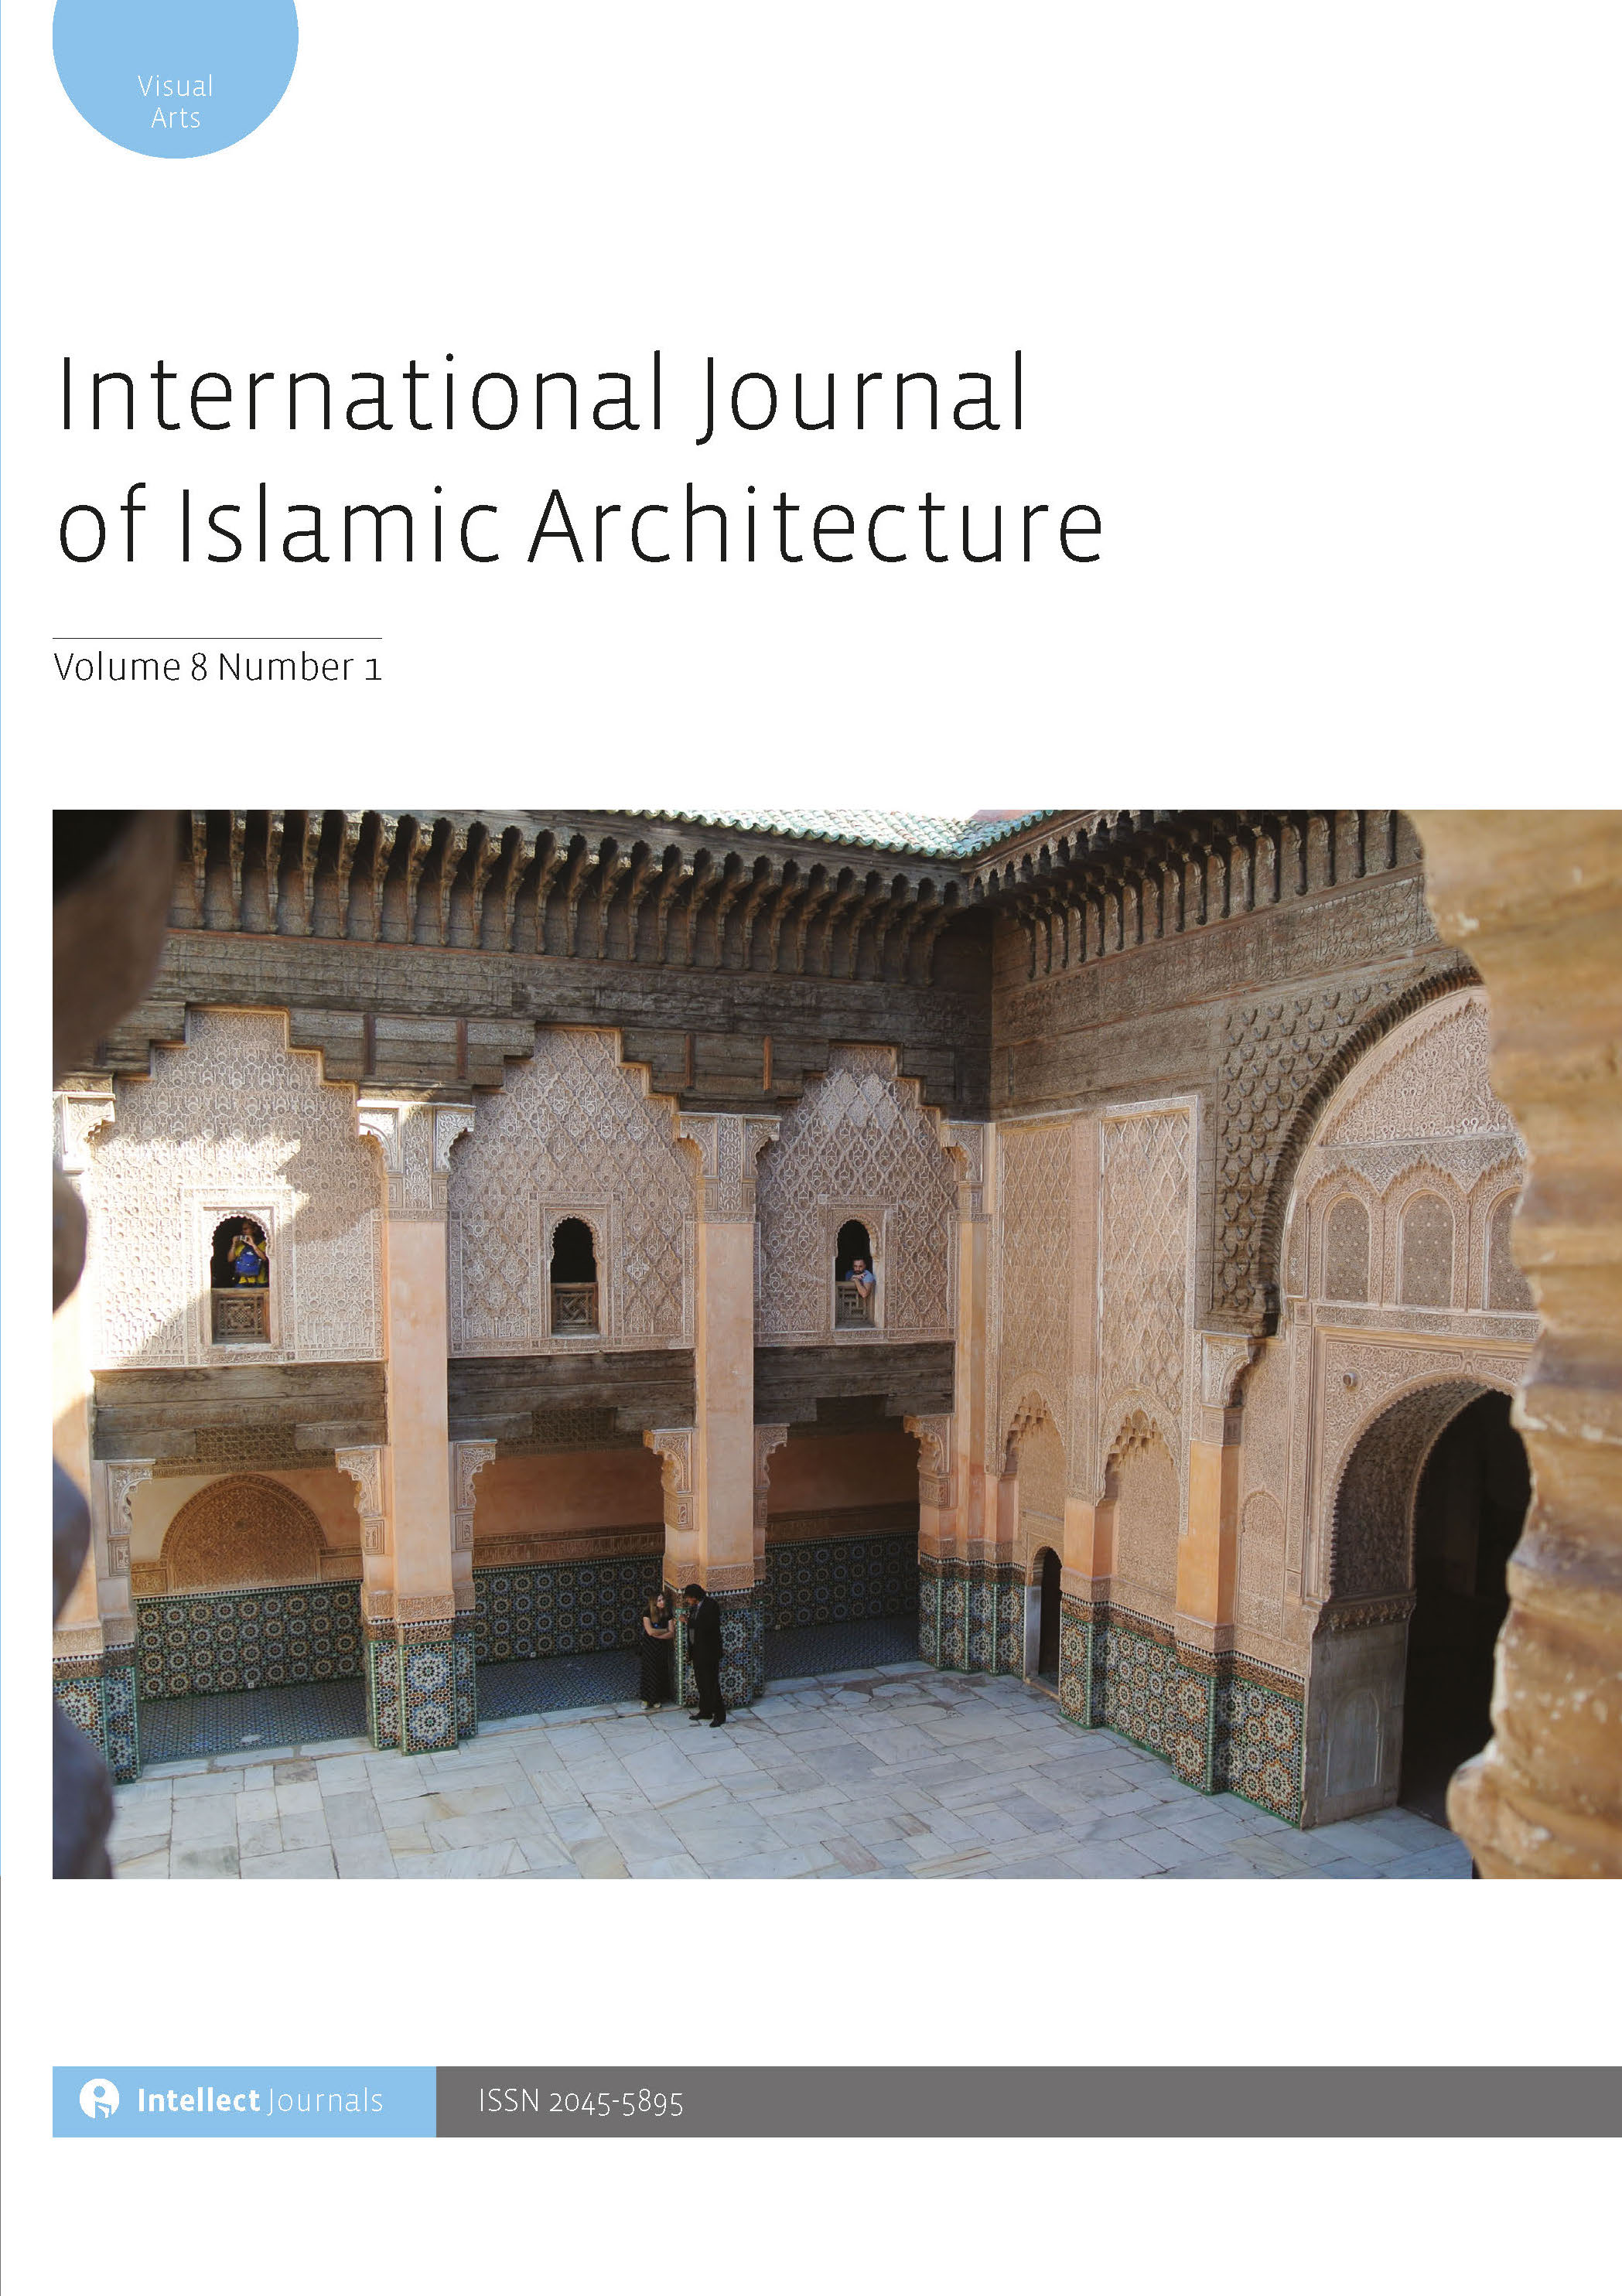 Reflections on Architectural Education of the Muslim World within a global World